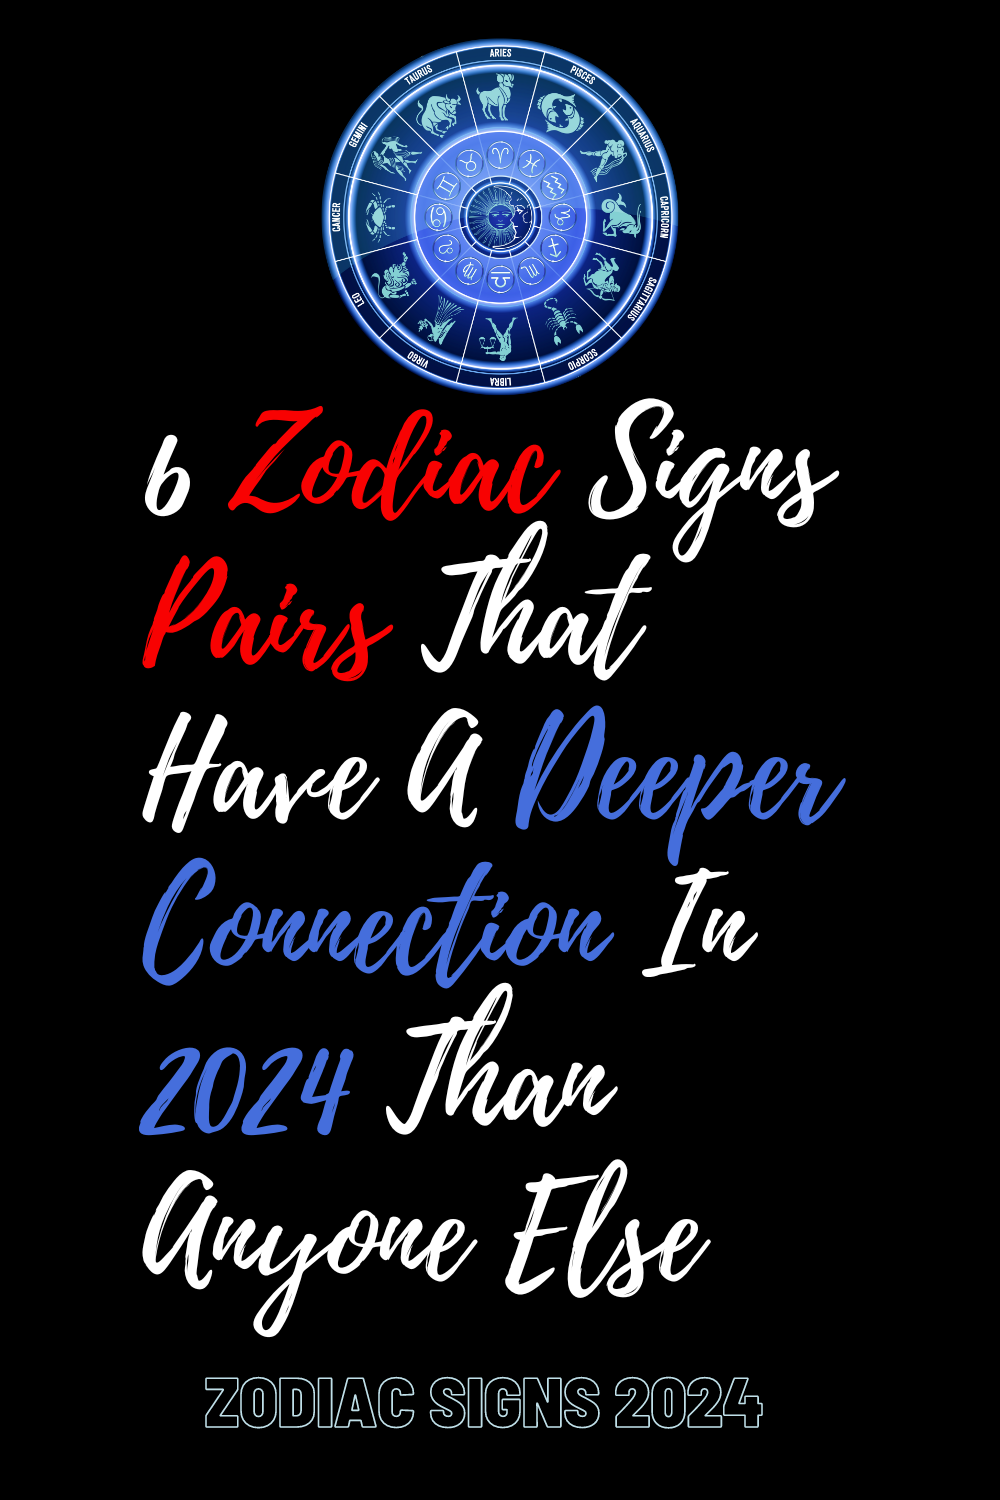 6 Zodiac Signs Pairs That Have A Deeper Connection In 2024 Than Anyone Else